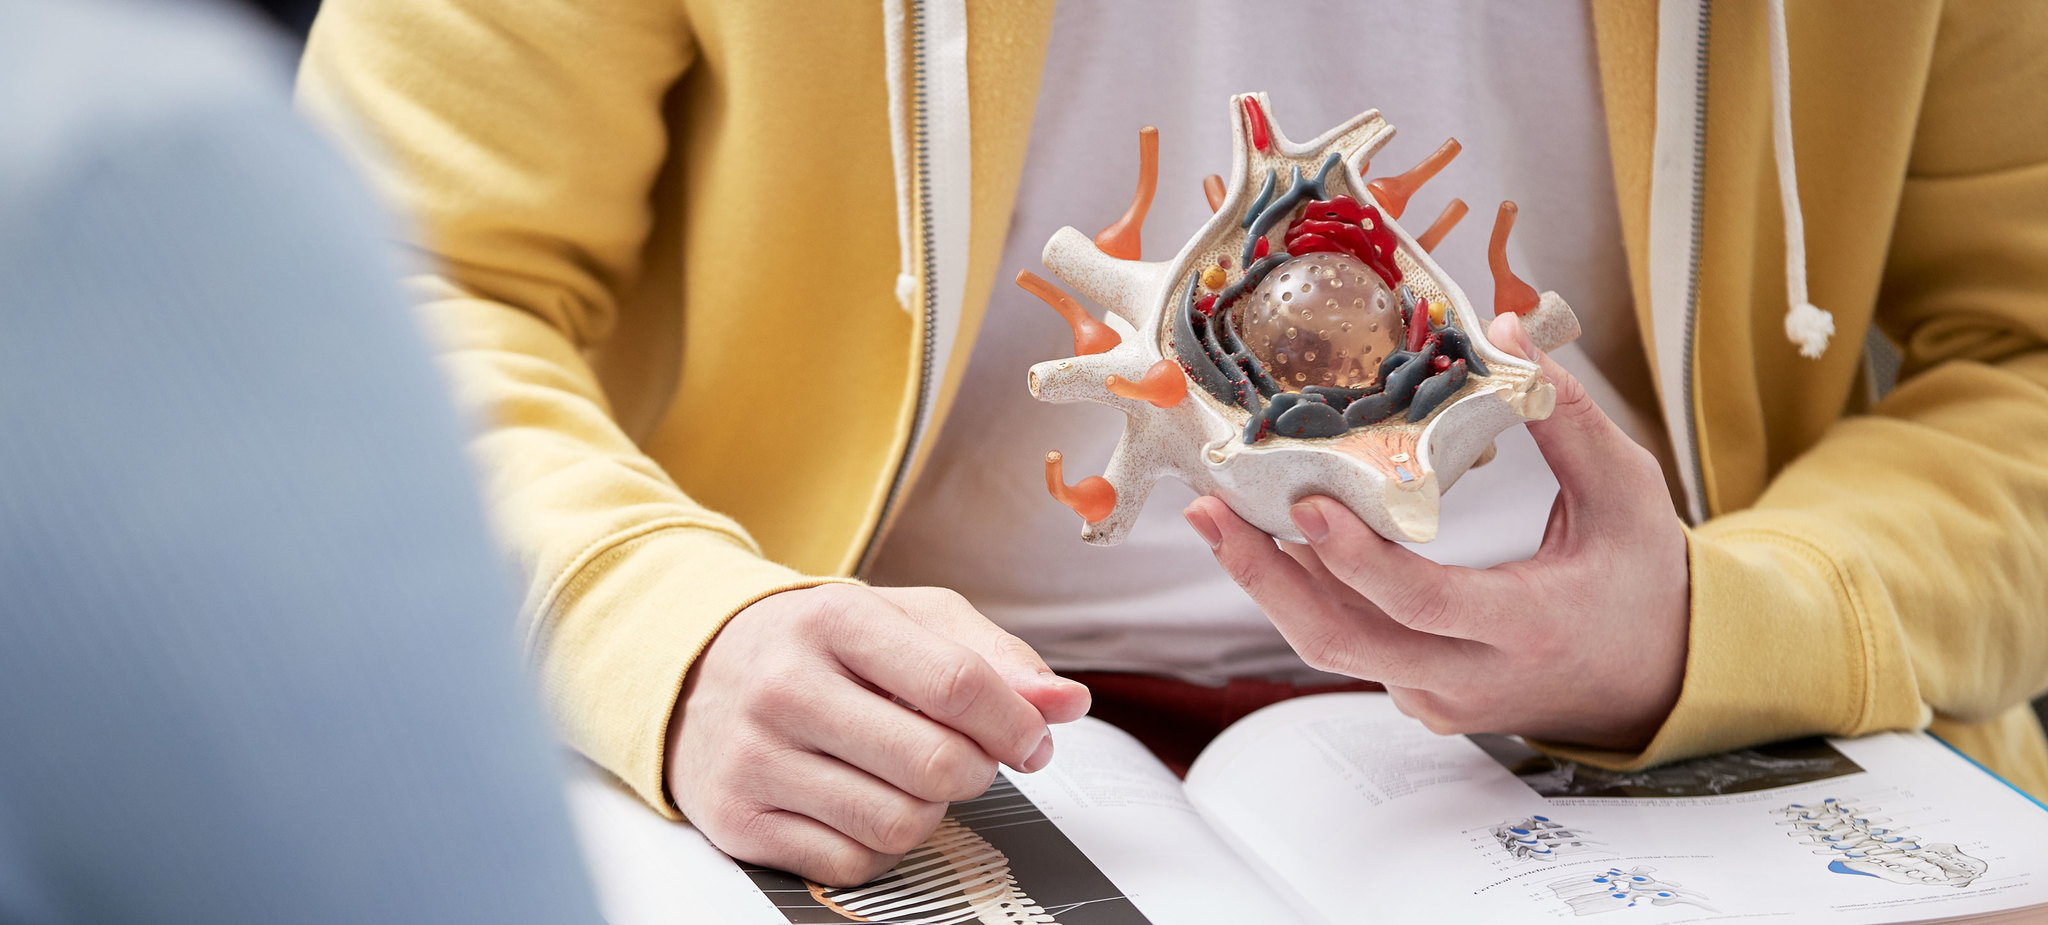 Male student holds a model of the heart over a medical textbook.